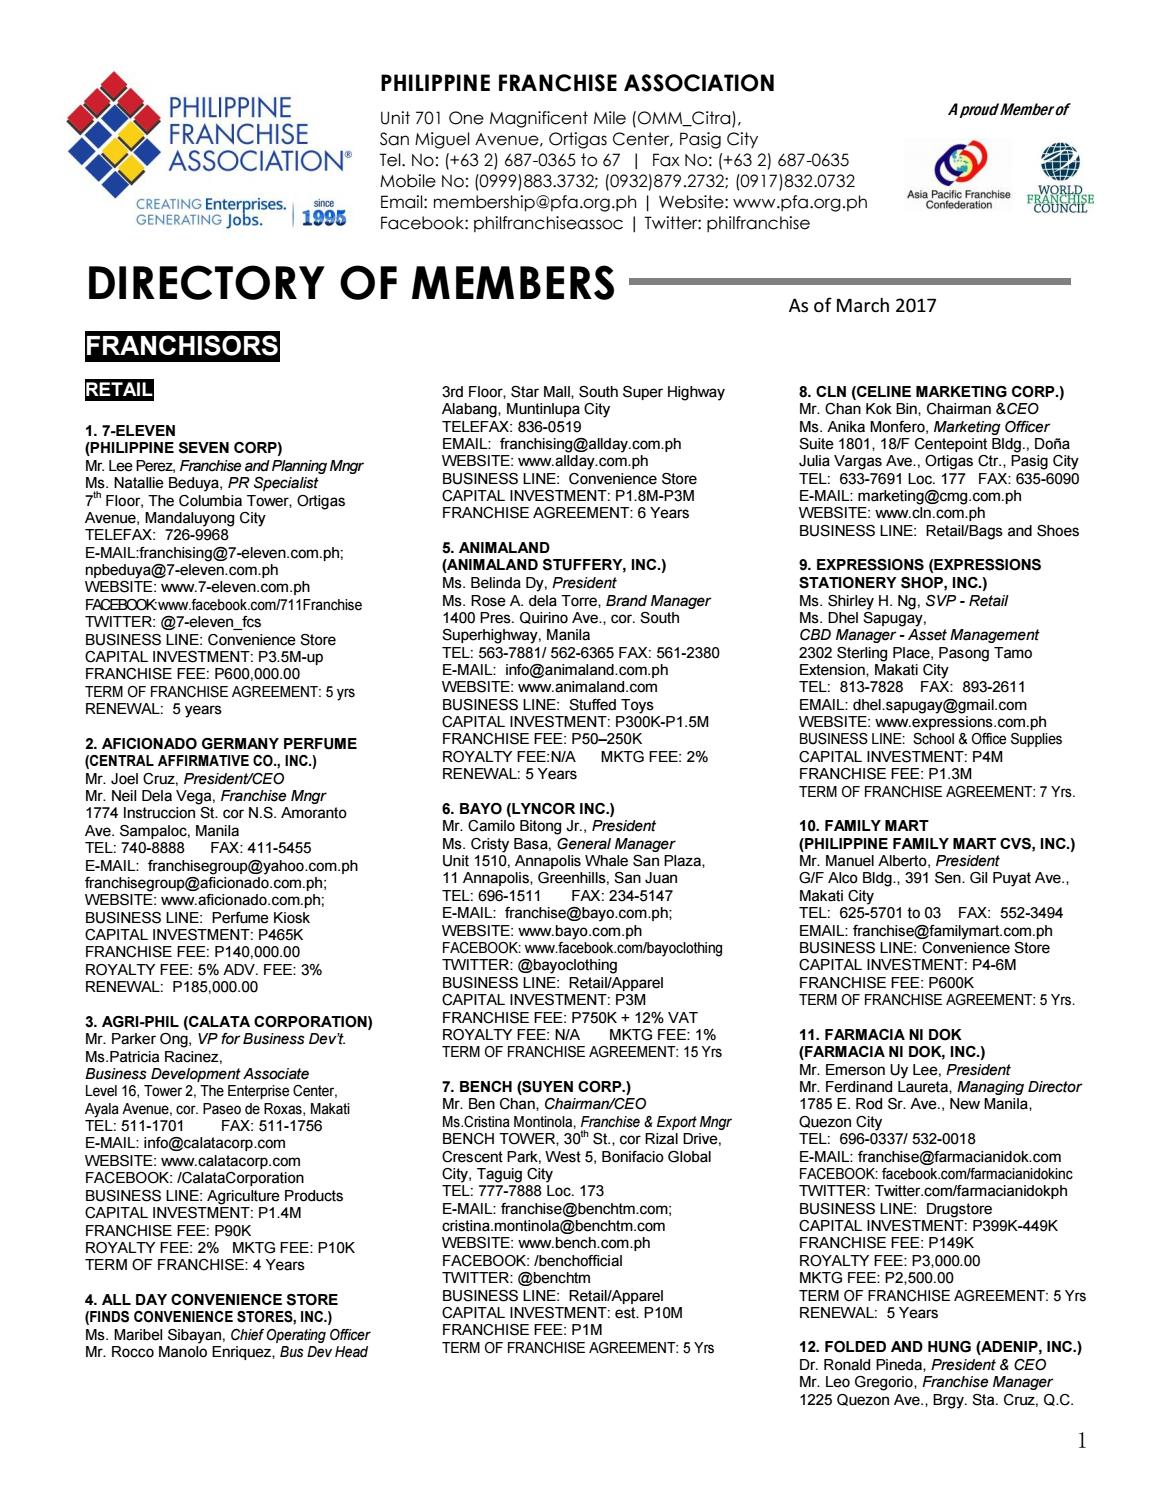 Mcdonalds Franchise Agreement Directory Of Franchisors In The Philippines March 2017 Dti